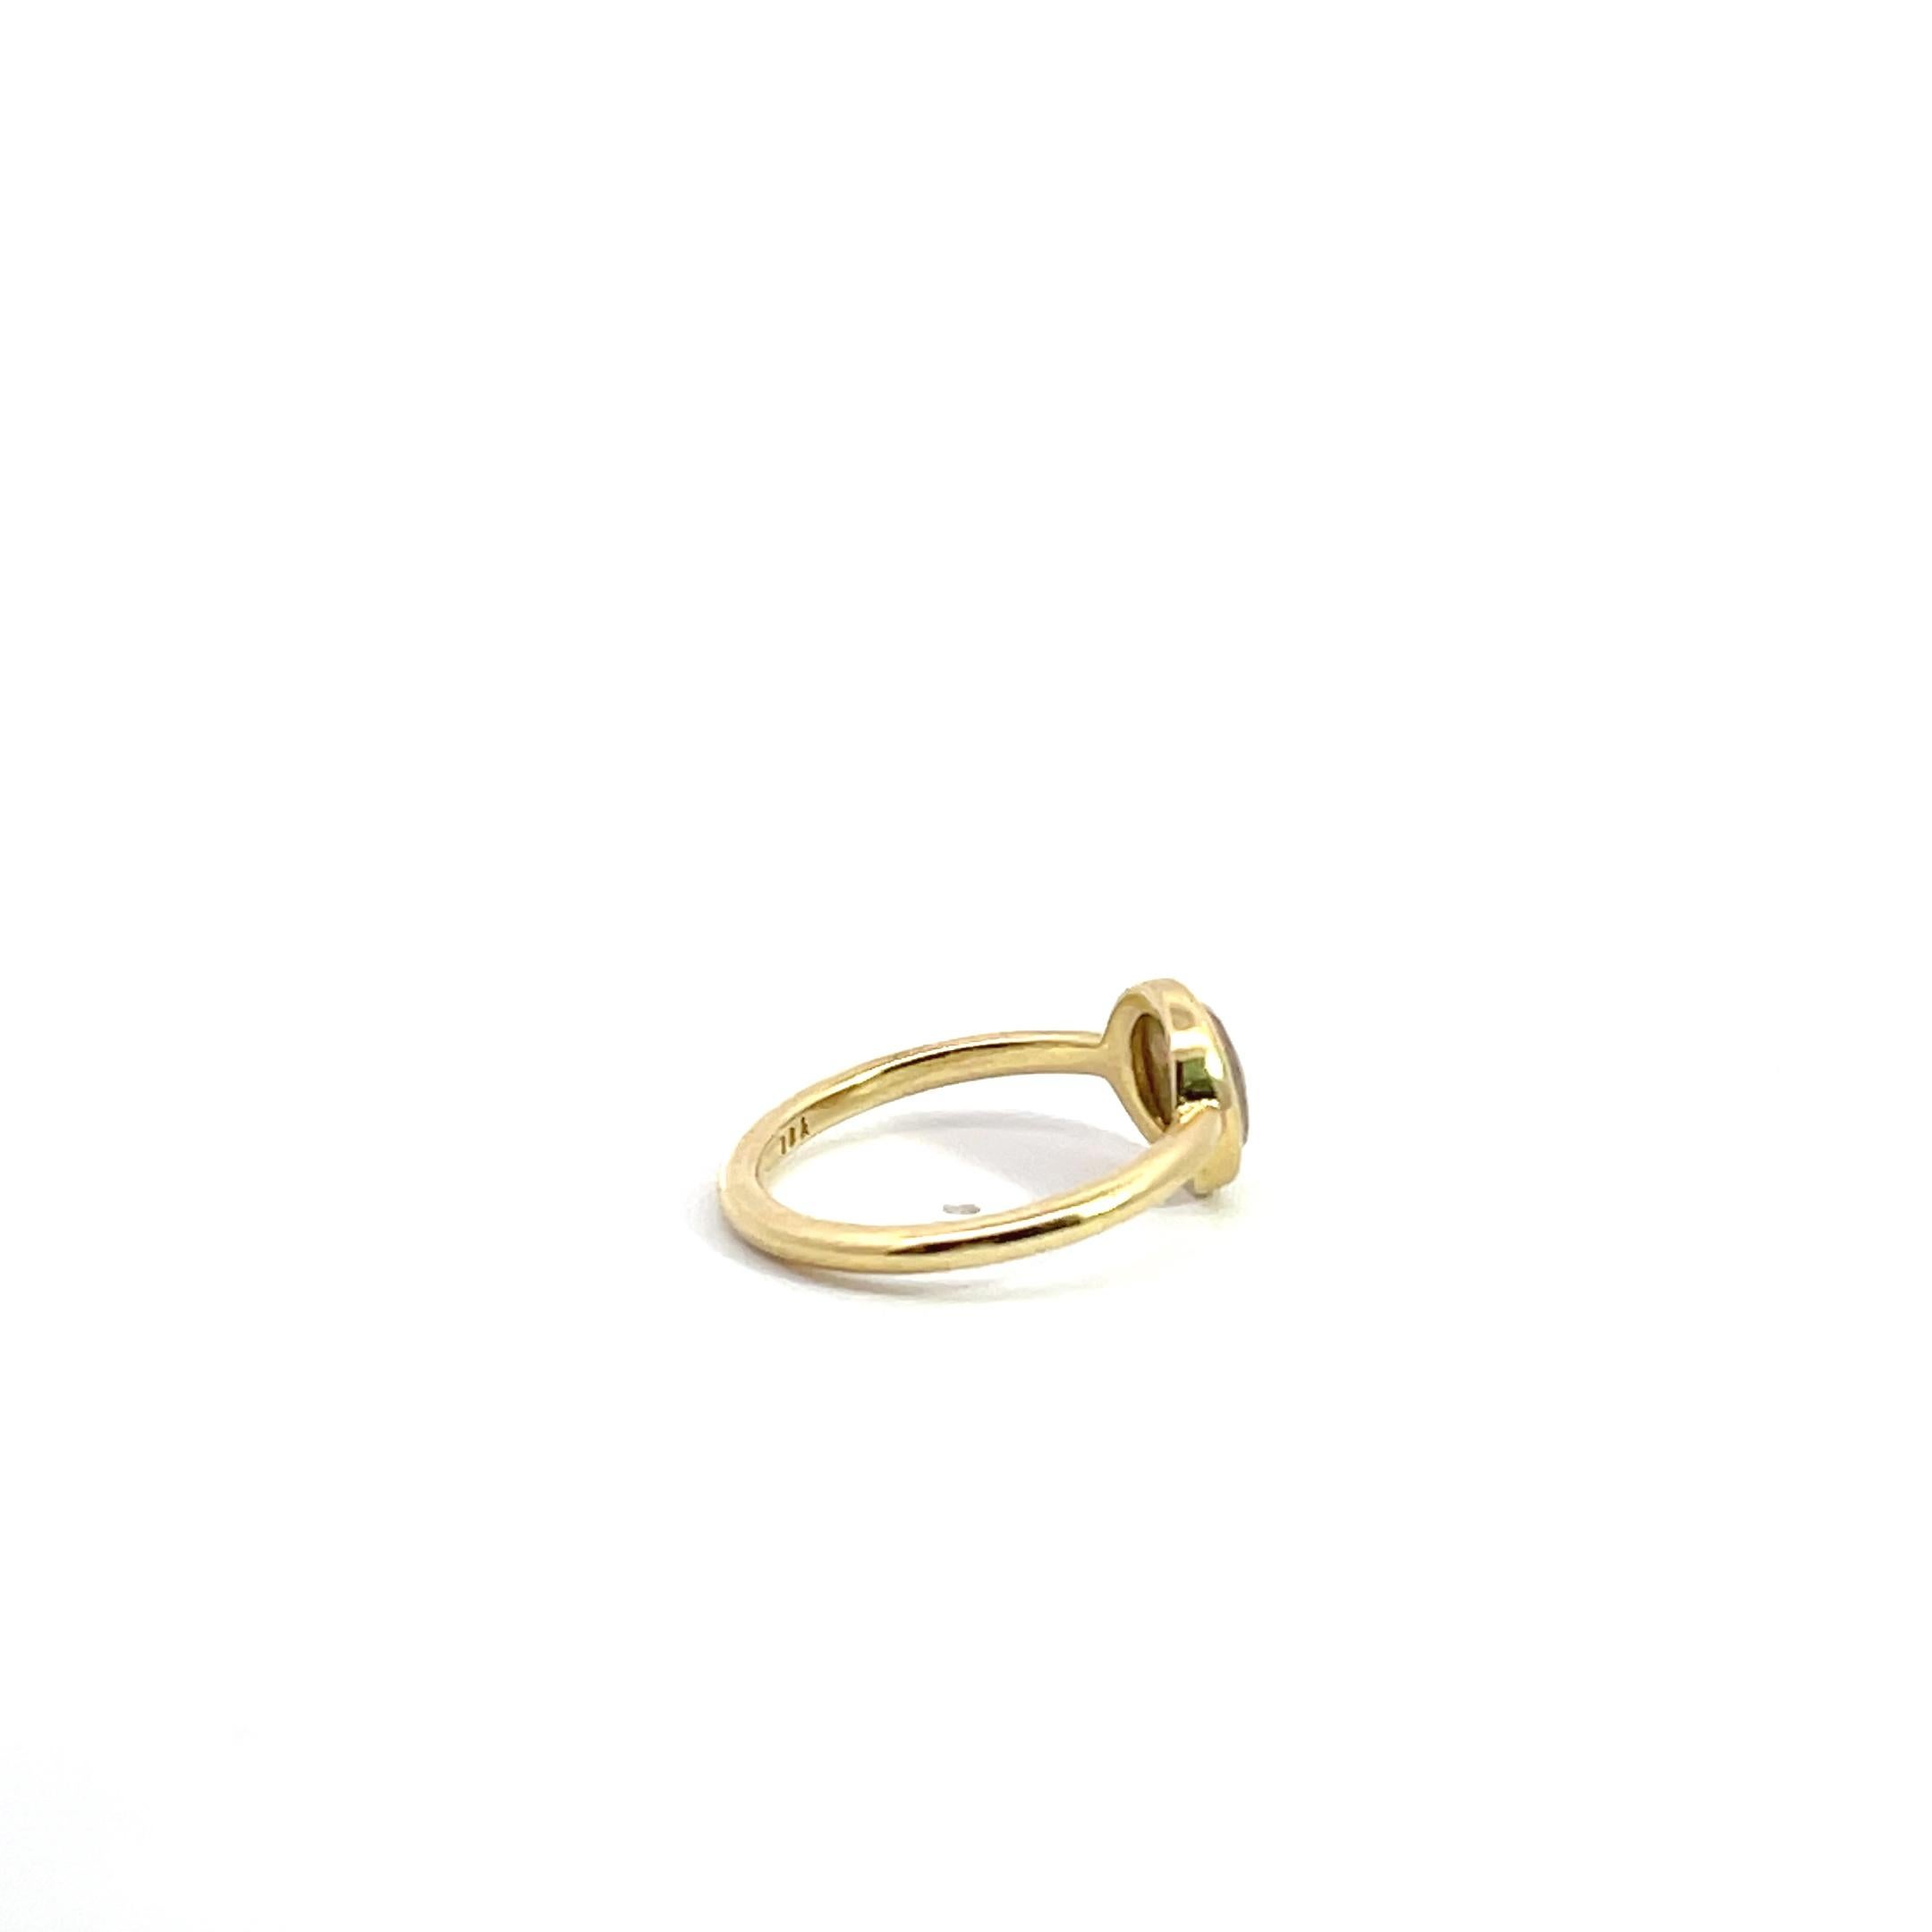 Contemporary 18k Yellow Gold Ring with a Gray Rose Cut Diamond For Sale